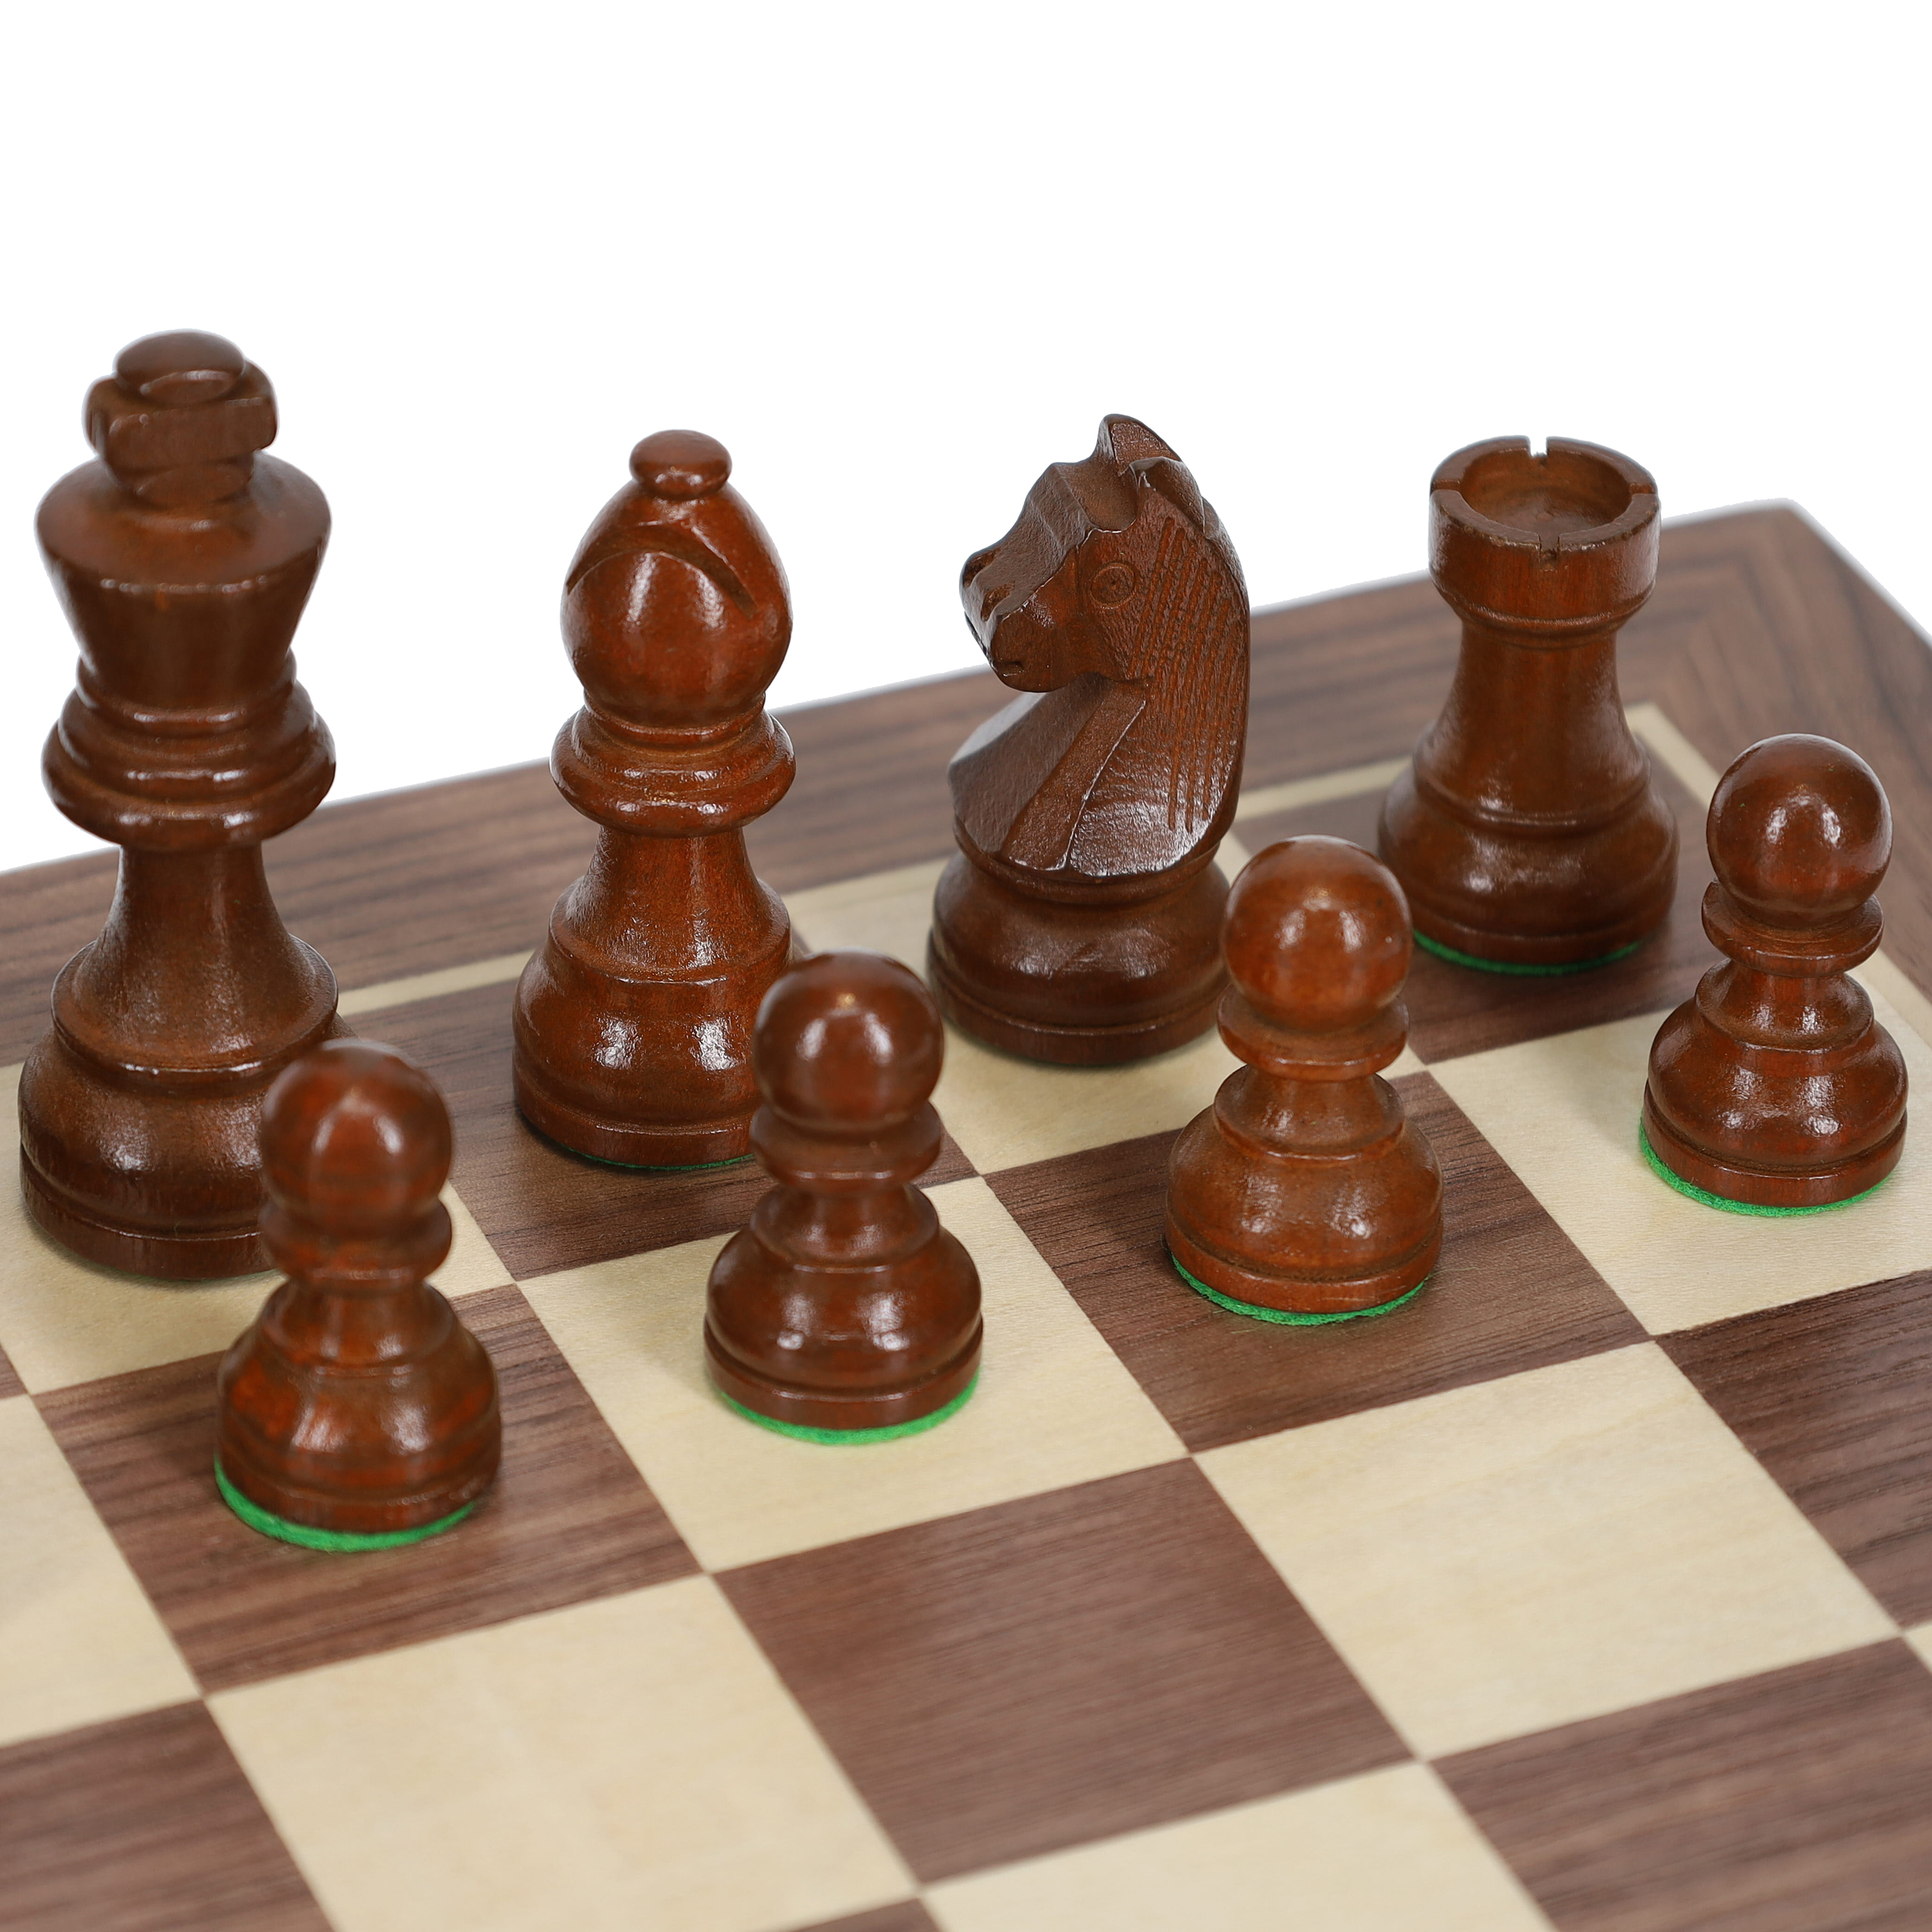 French Staunton Chess Set – Weighted Pieces & Walnut Wood Board